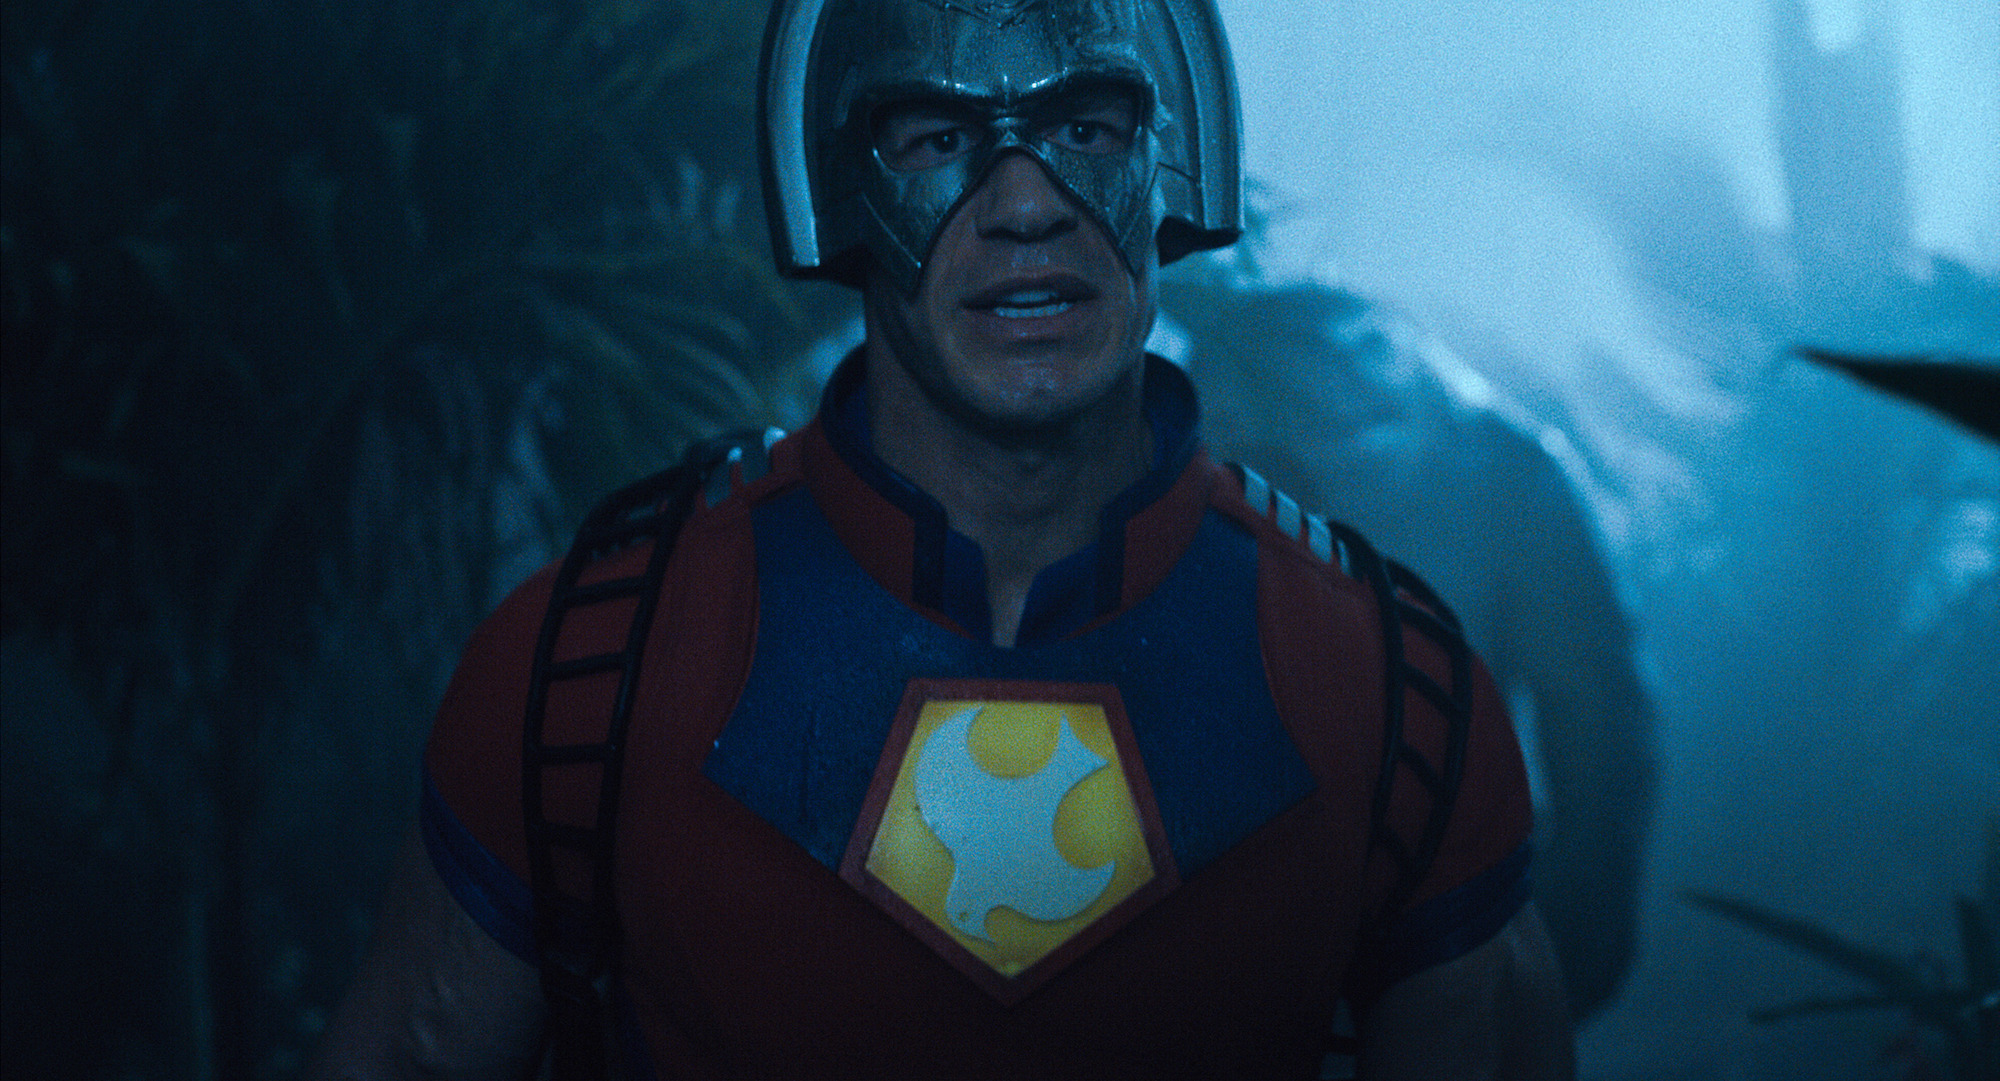 John Cena as Peacemaker in James Gunn's 'The Suicide Squad.' He's wearing his helmet and red, blue, and yellow suit.